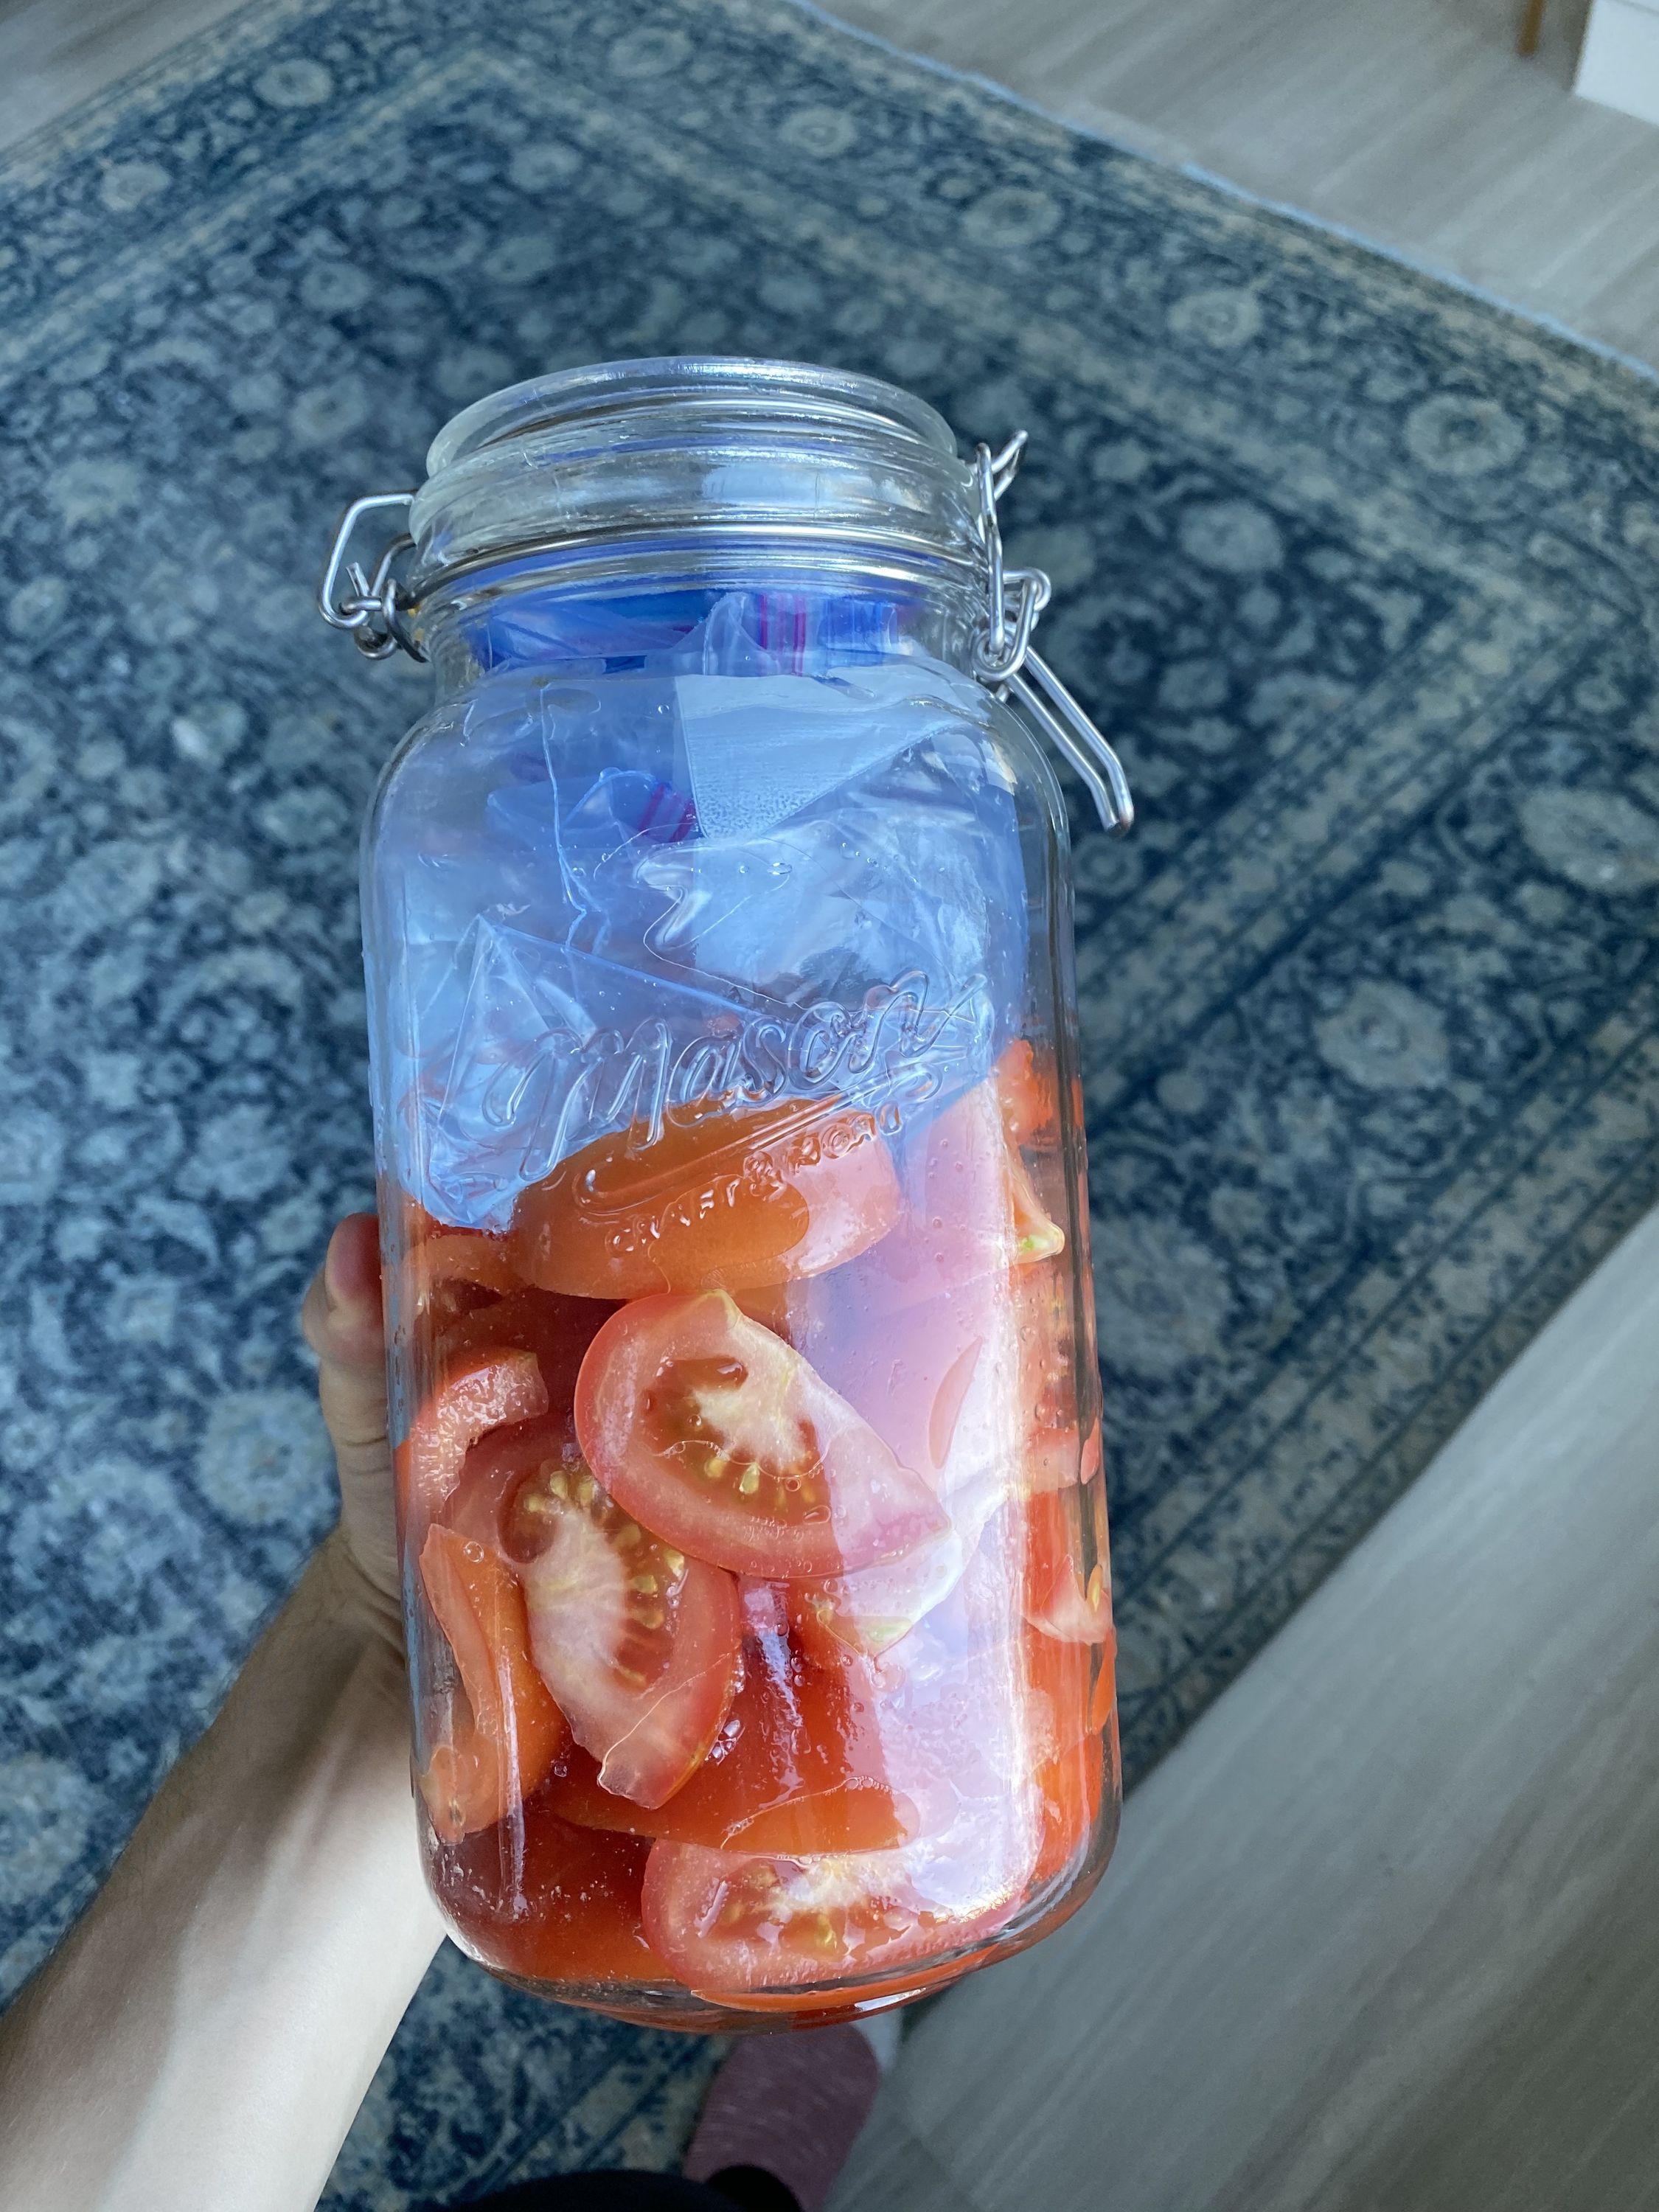 Tomatoes in a jar